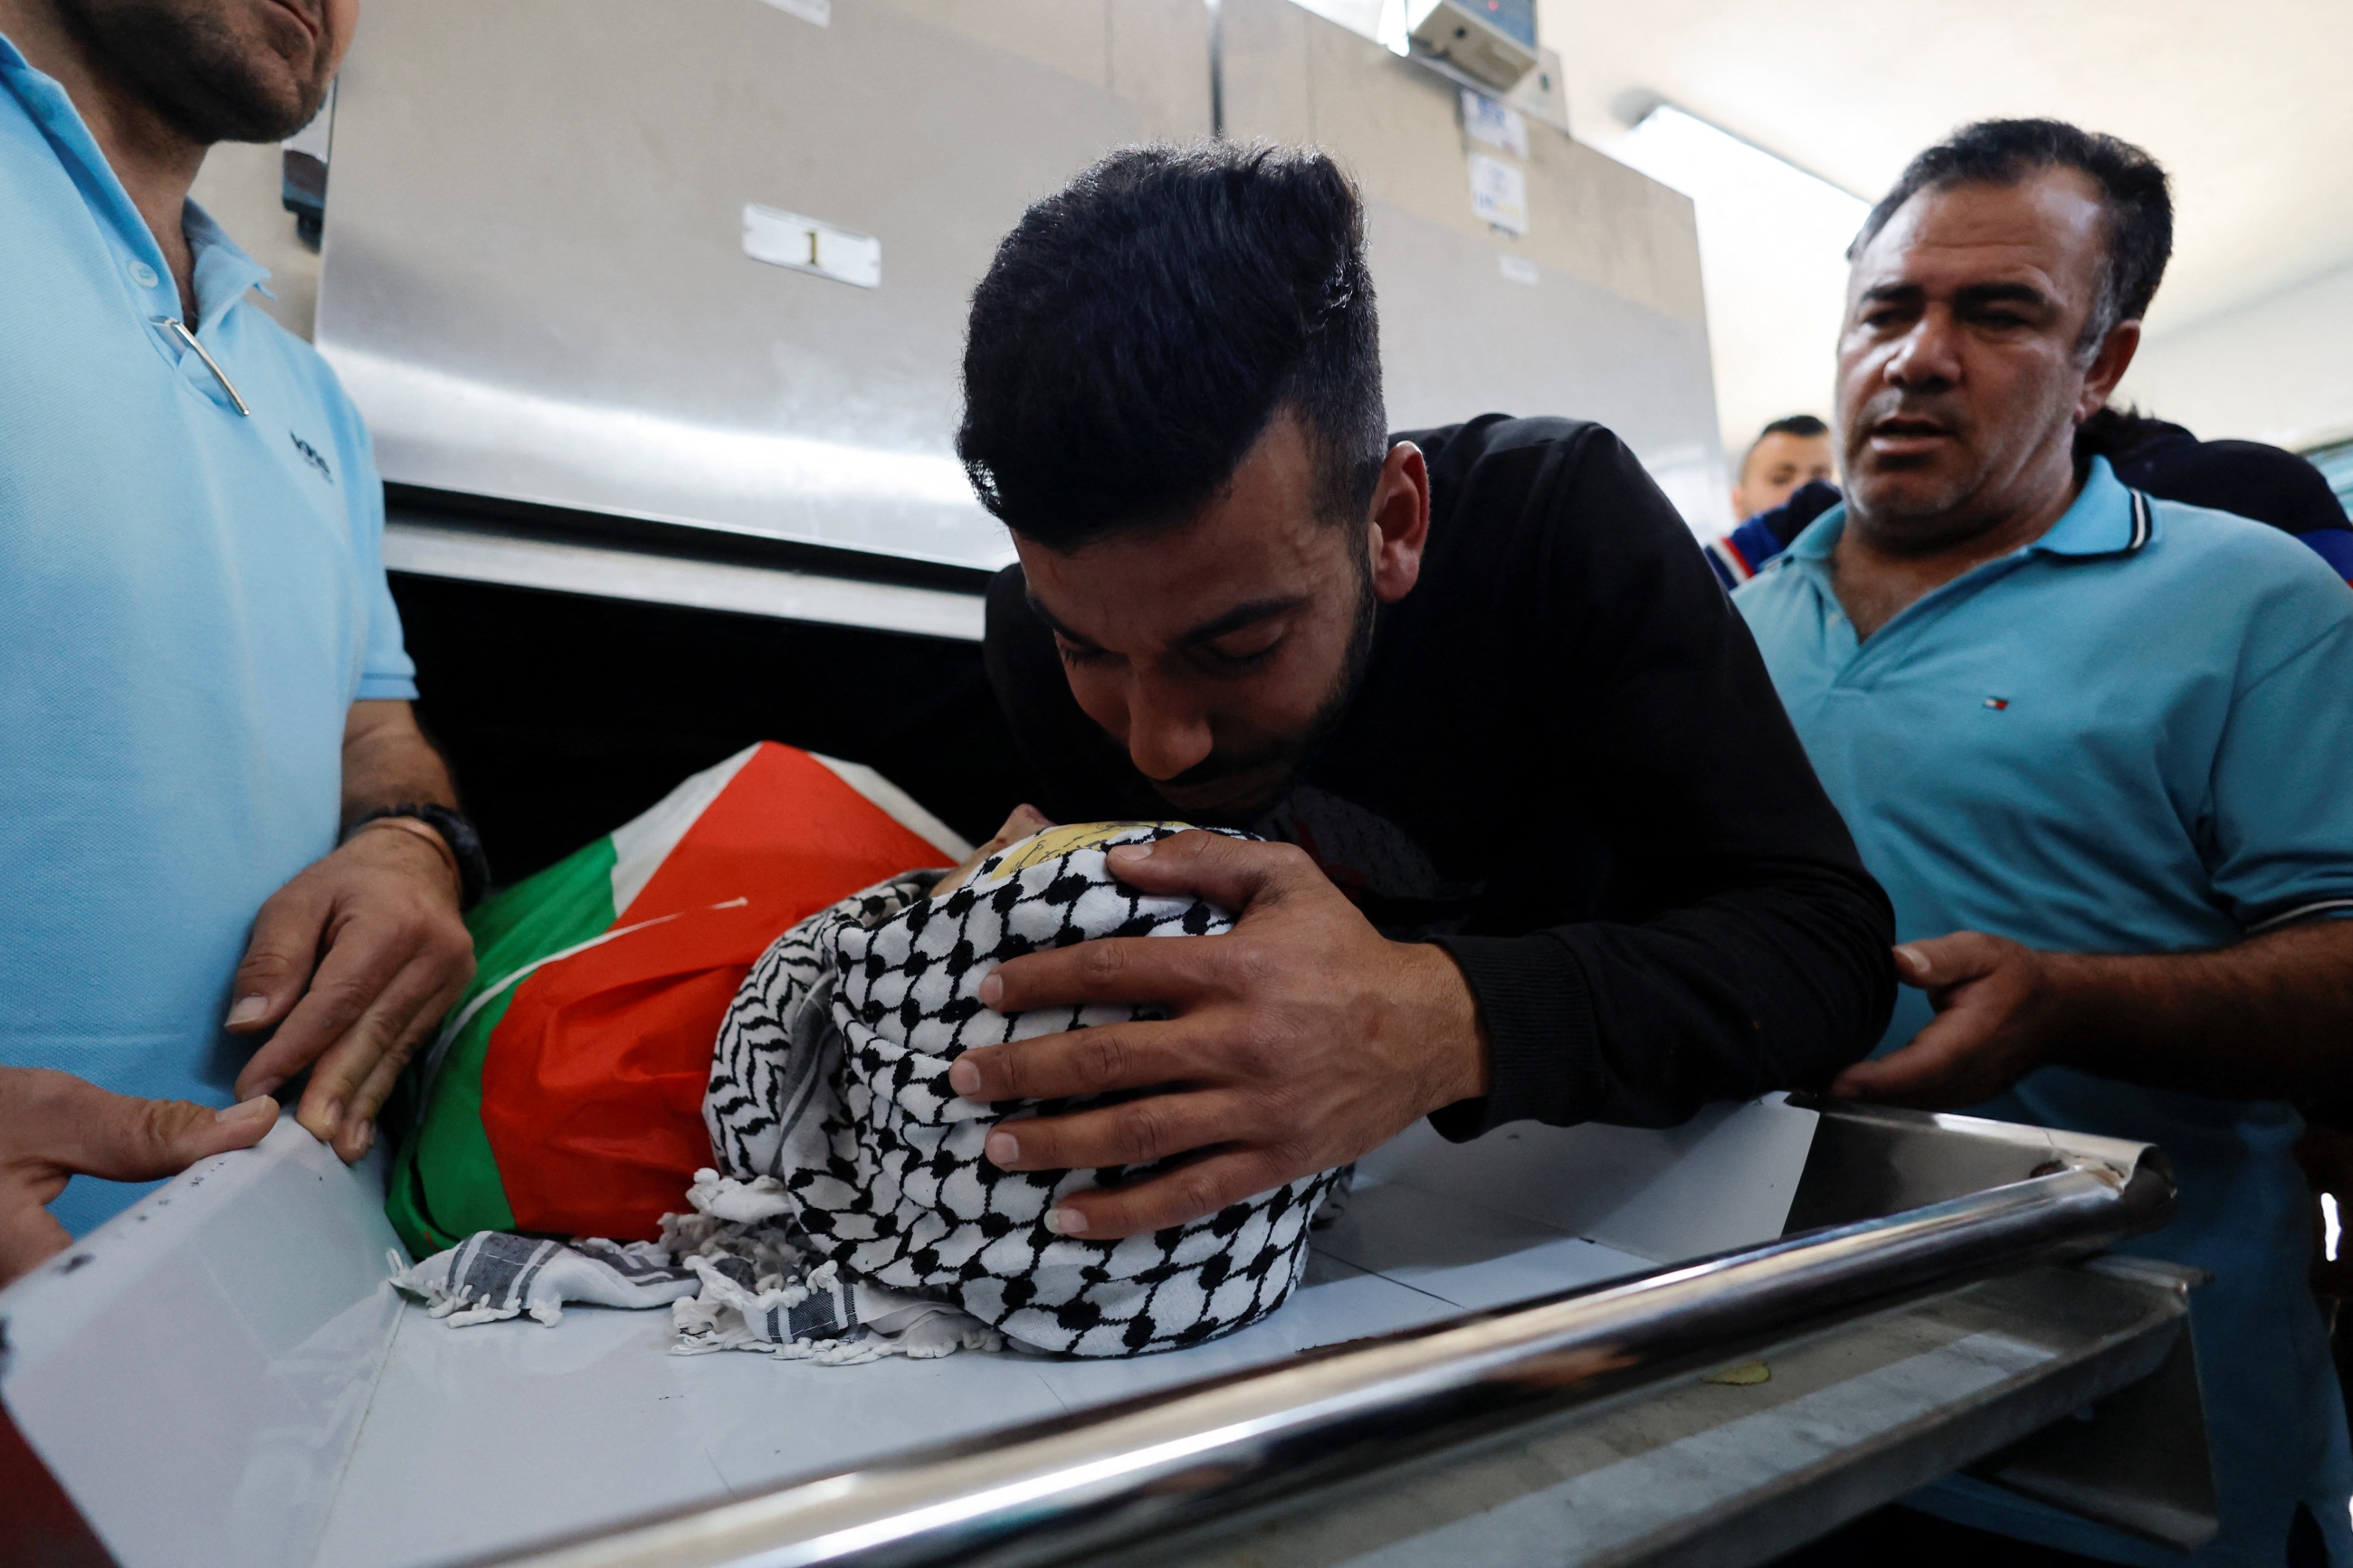 A mourner kisses the body of Palestinian Mohammad Ghoneim who was killed by Israeli forces in Bethlehem on 11 April 2022. (Reuters)